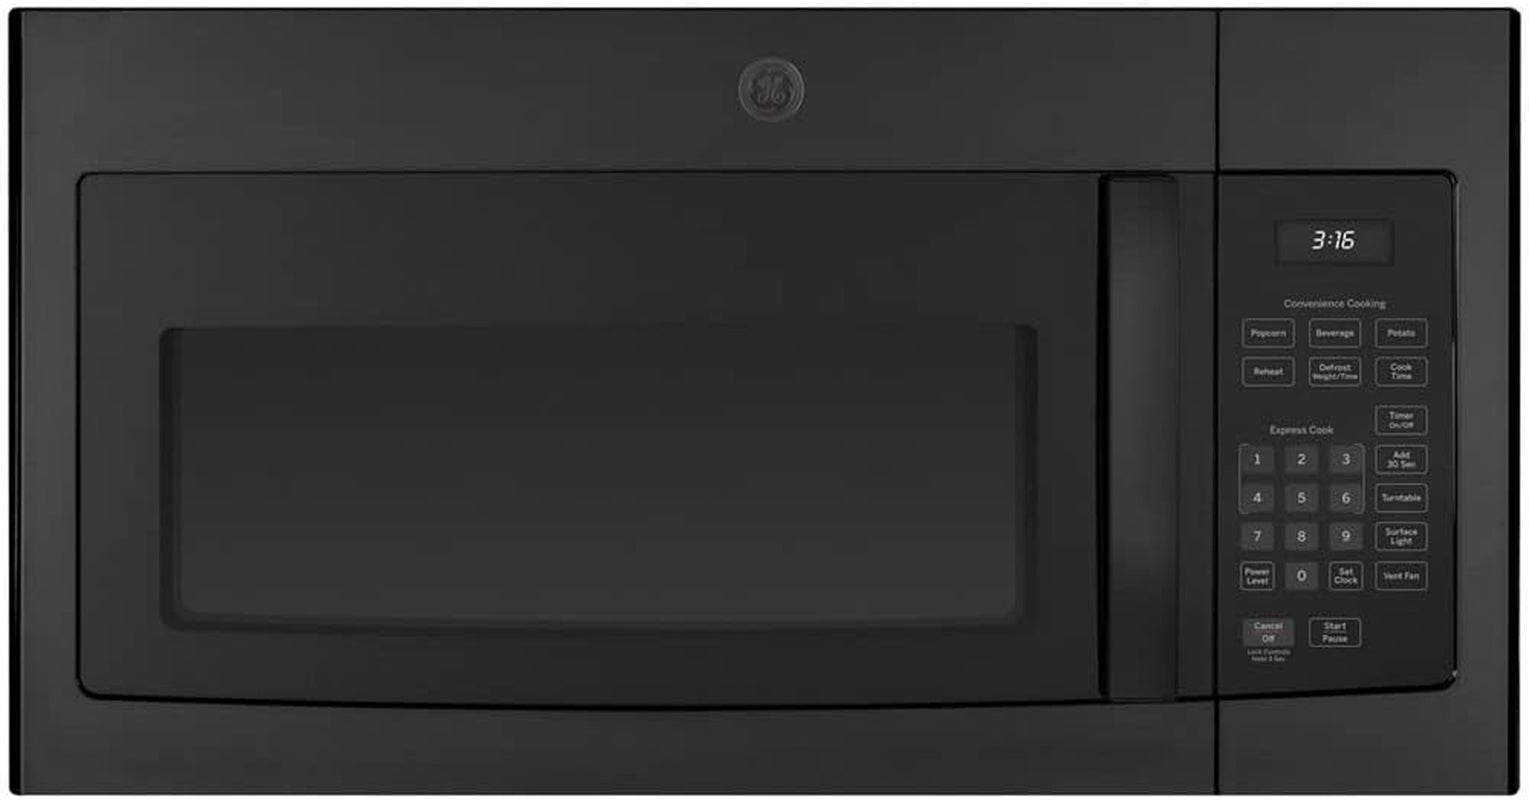 JVM3160DFBB 1.6 Cu. Ft. Over-The-Ran Microwave Oven Black Bundle with 2 YR CPS Enhanced Protection Pack